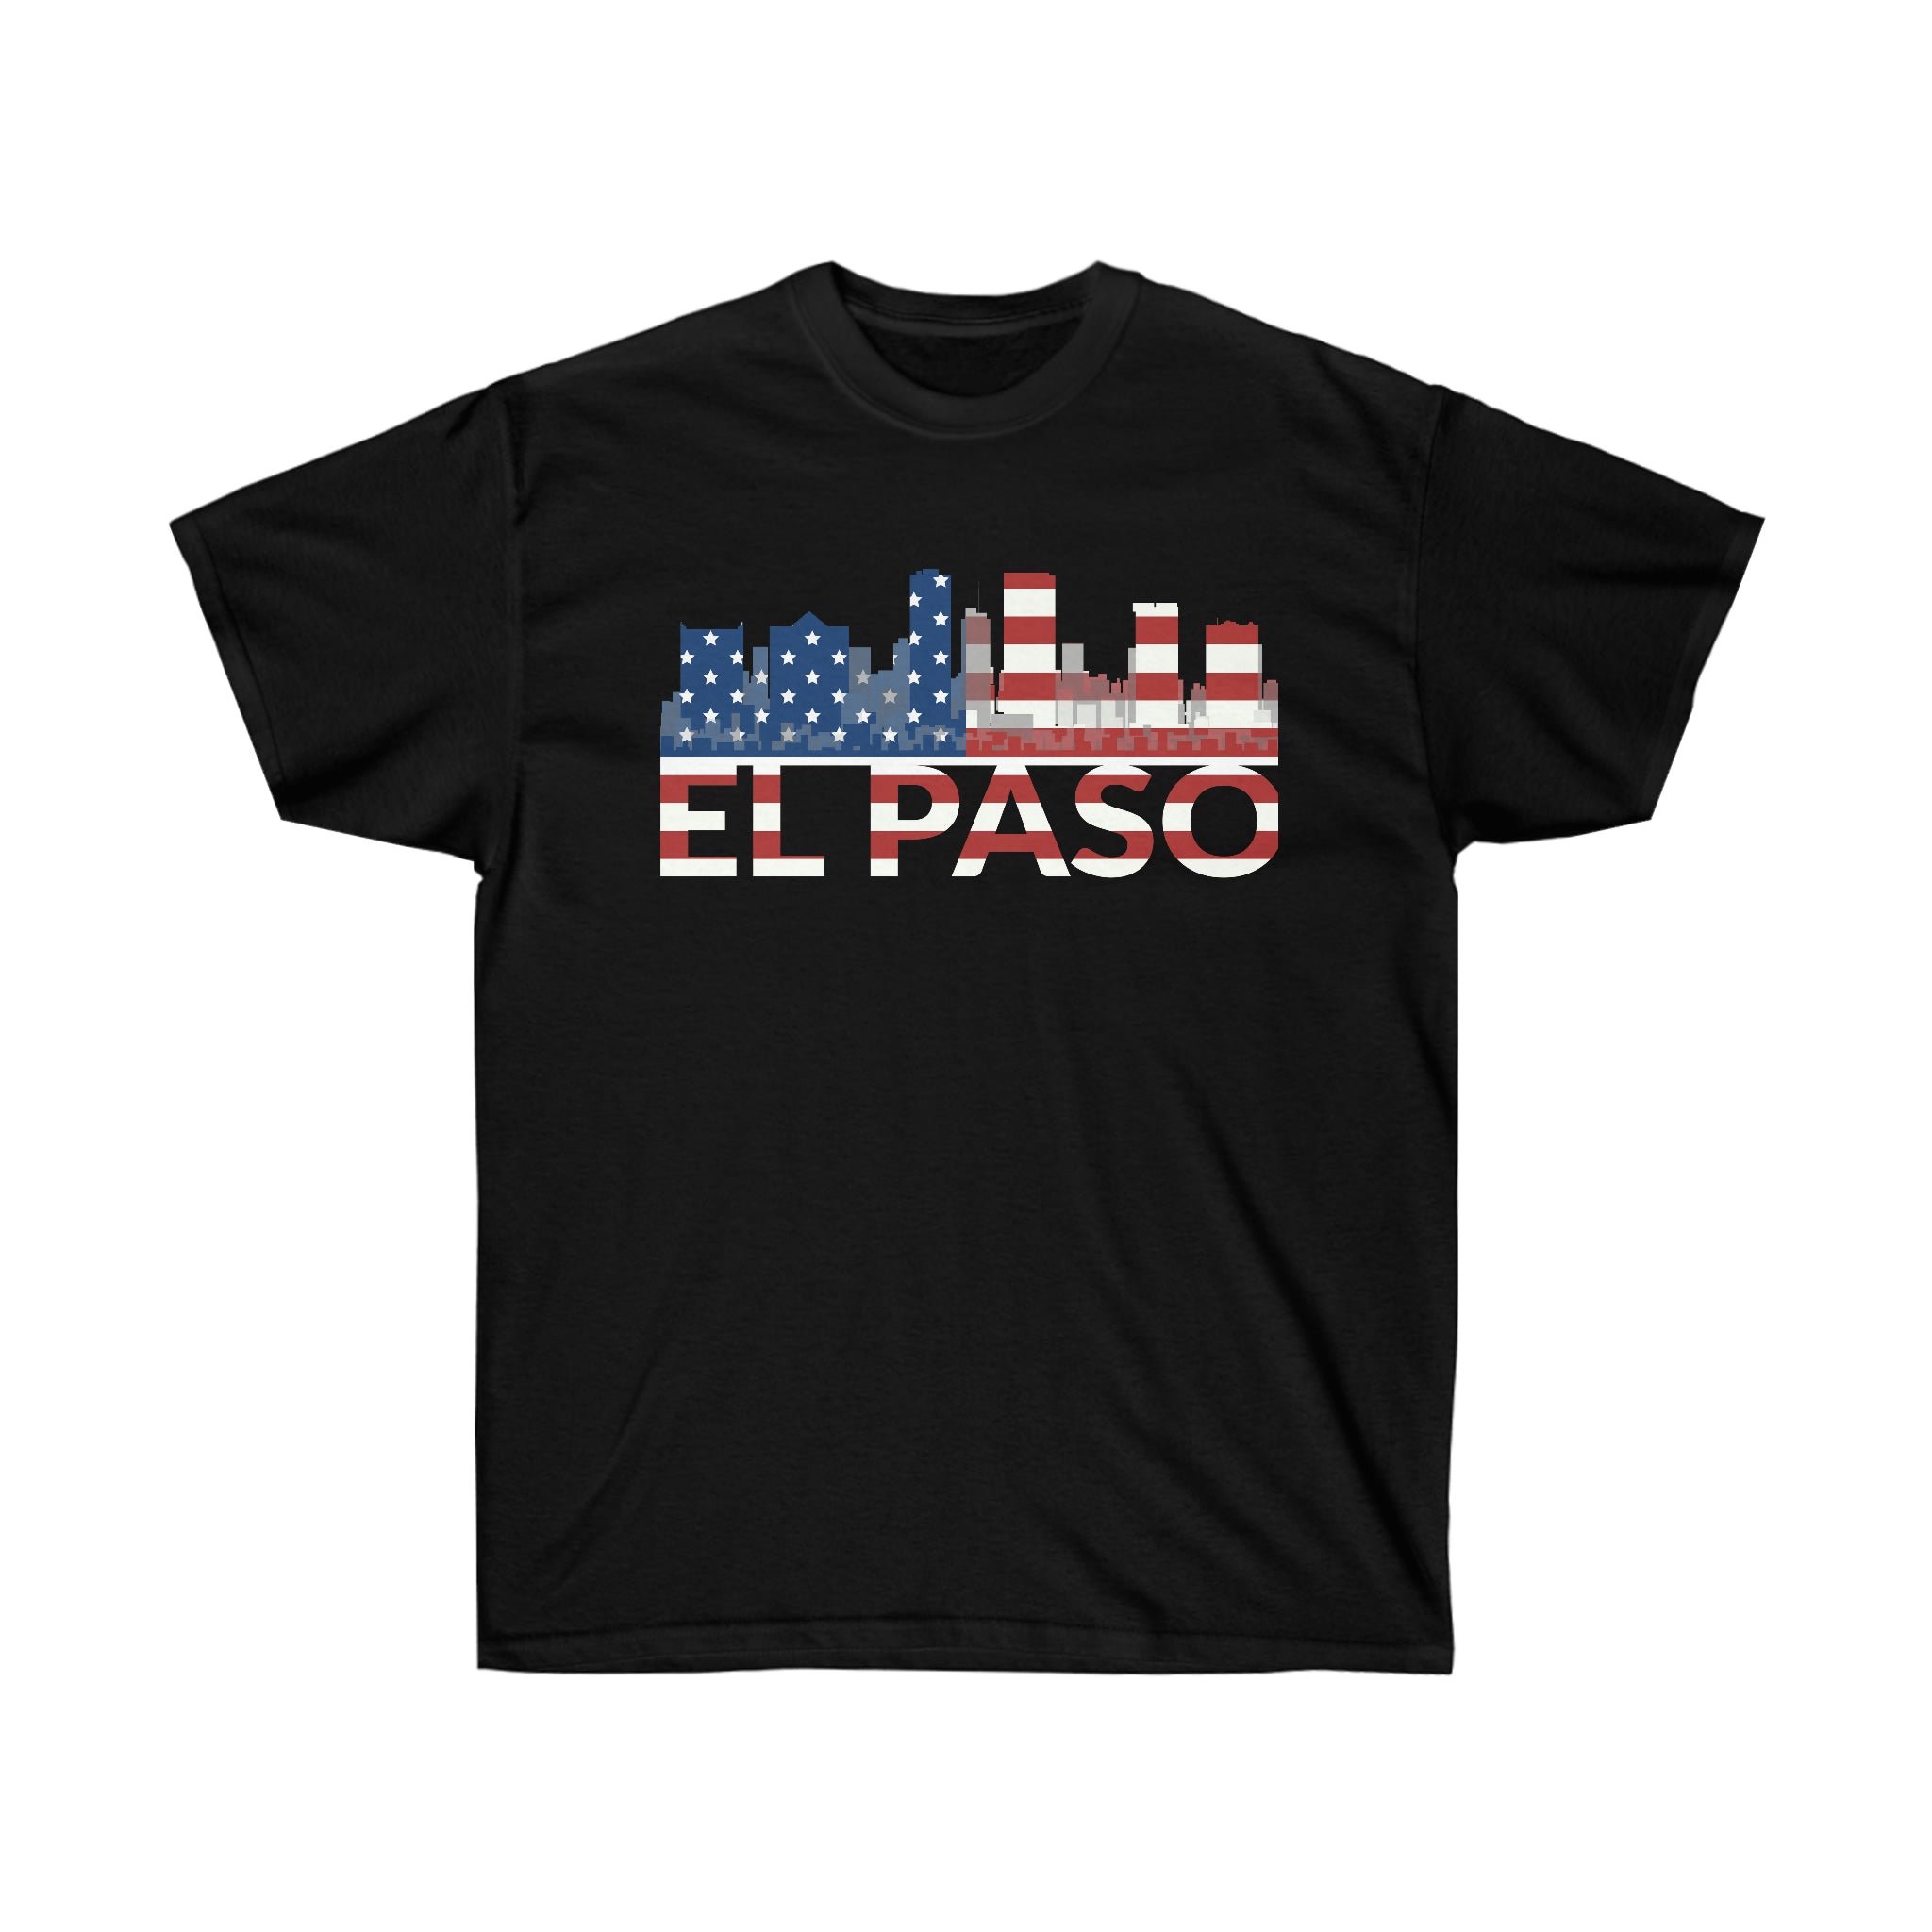 Unisex Ultra Cotton Tee "Higher Quality Materials"(EL PASO)